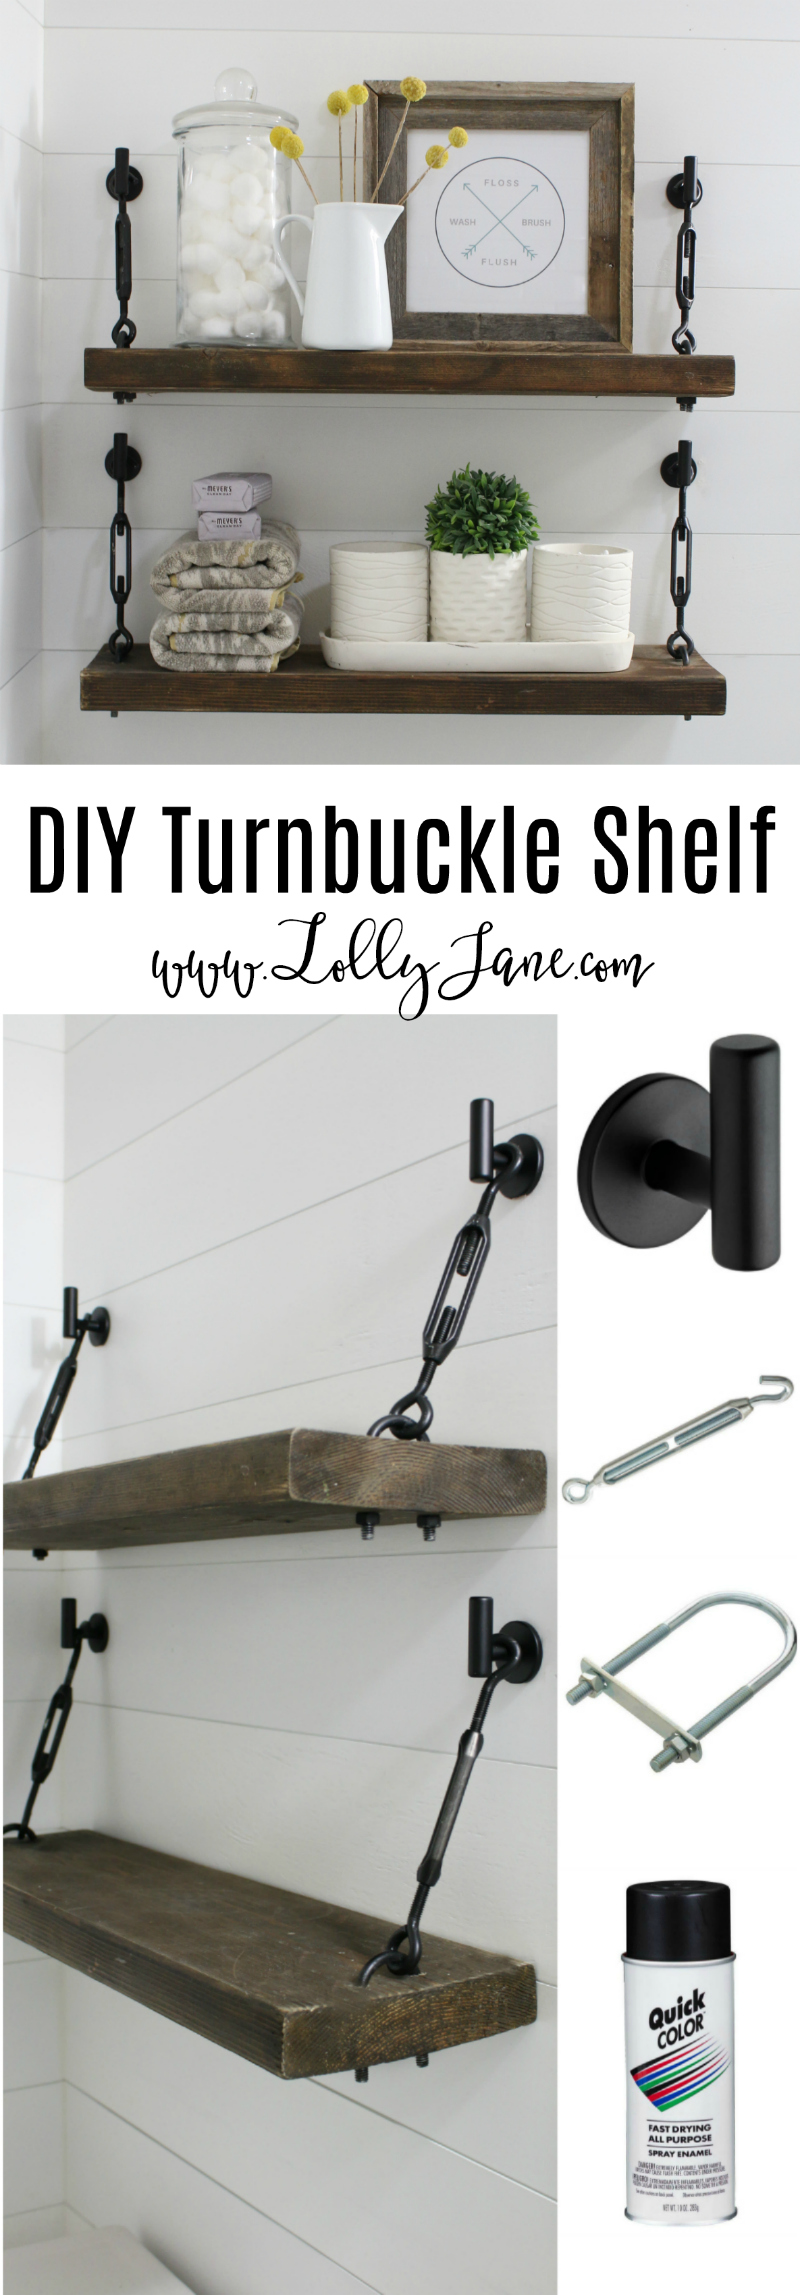 DIY Turnbuckle Shelf tutorial | Learn how easy it is to make these bathroom turnbuckle shelves! These would be so cute in any room of the house, farmhouse chic shelves look great and are sturdy enough for all your home decor needs!